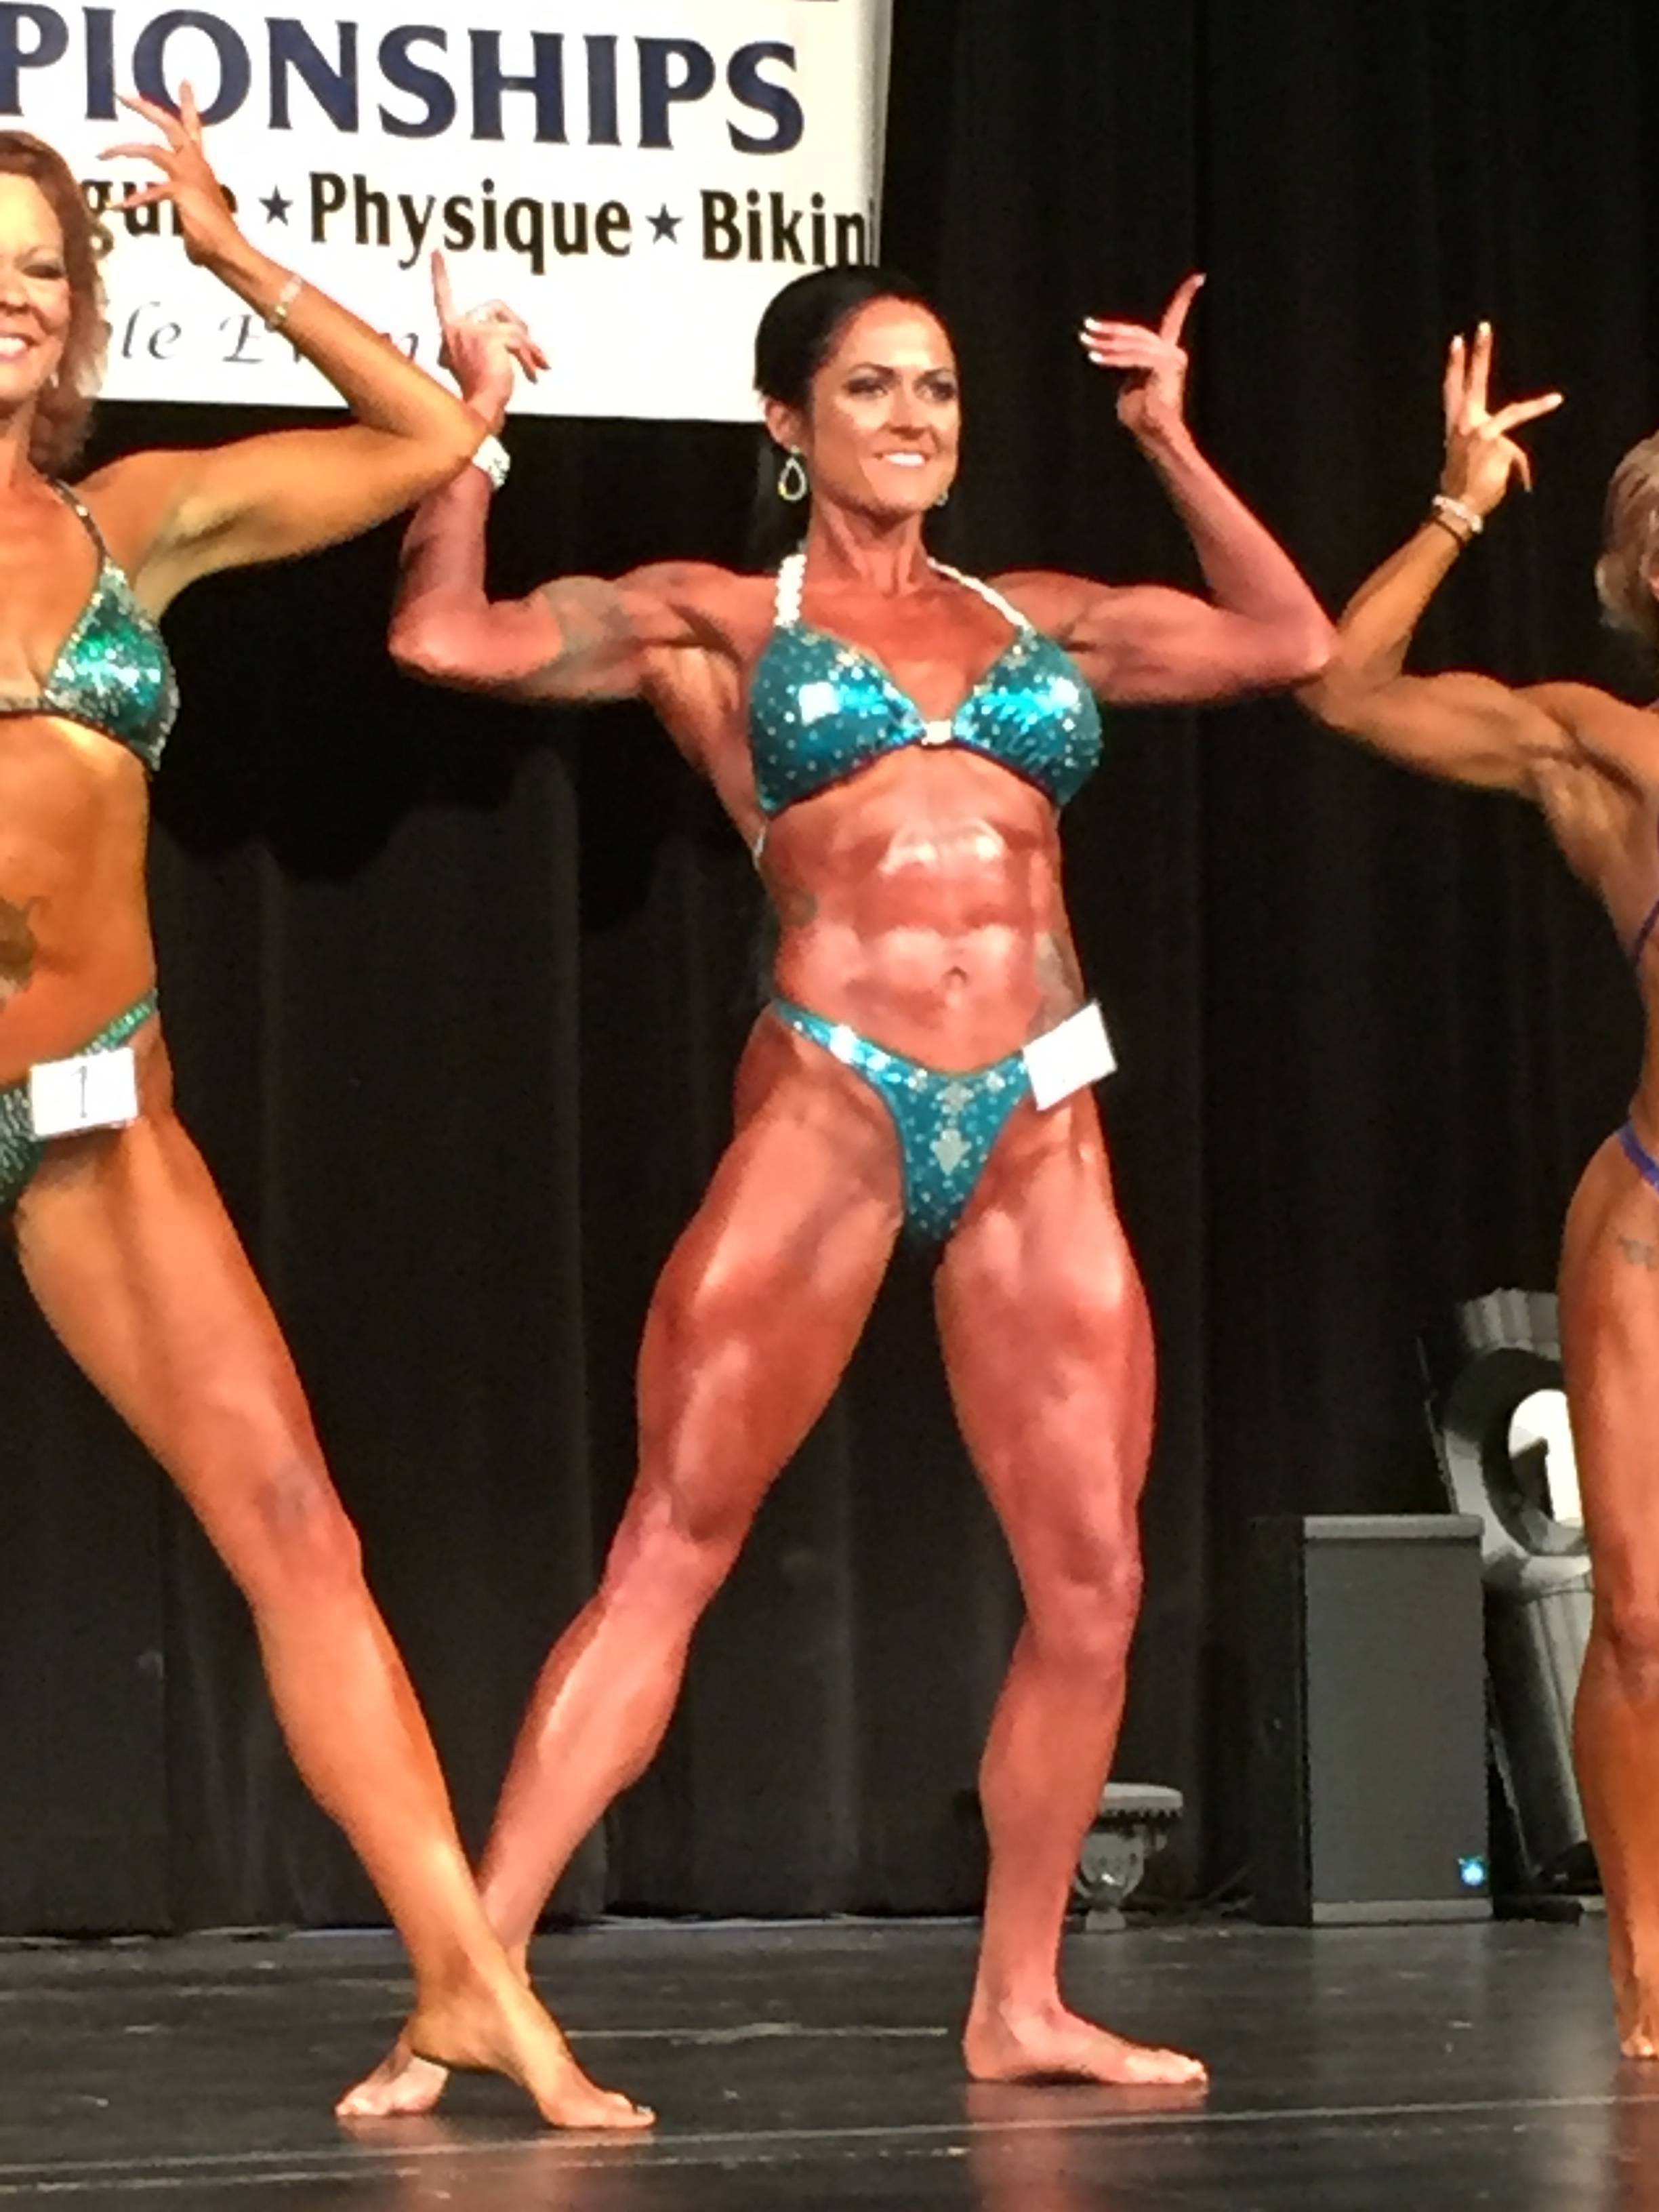 Face of Defense: Marine, Mother Wins at First Bodybuilding Competition >  U.S. Department of Defense > Defense Department News